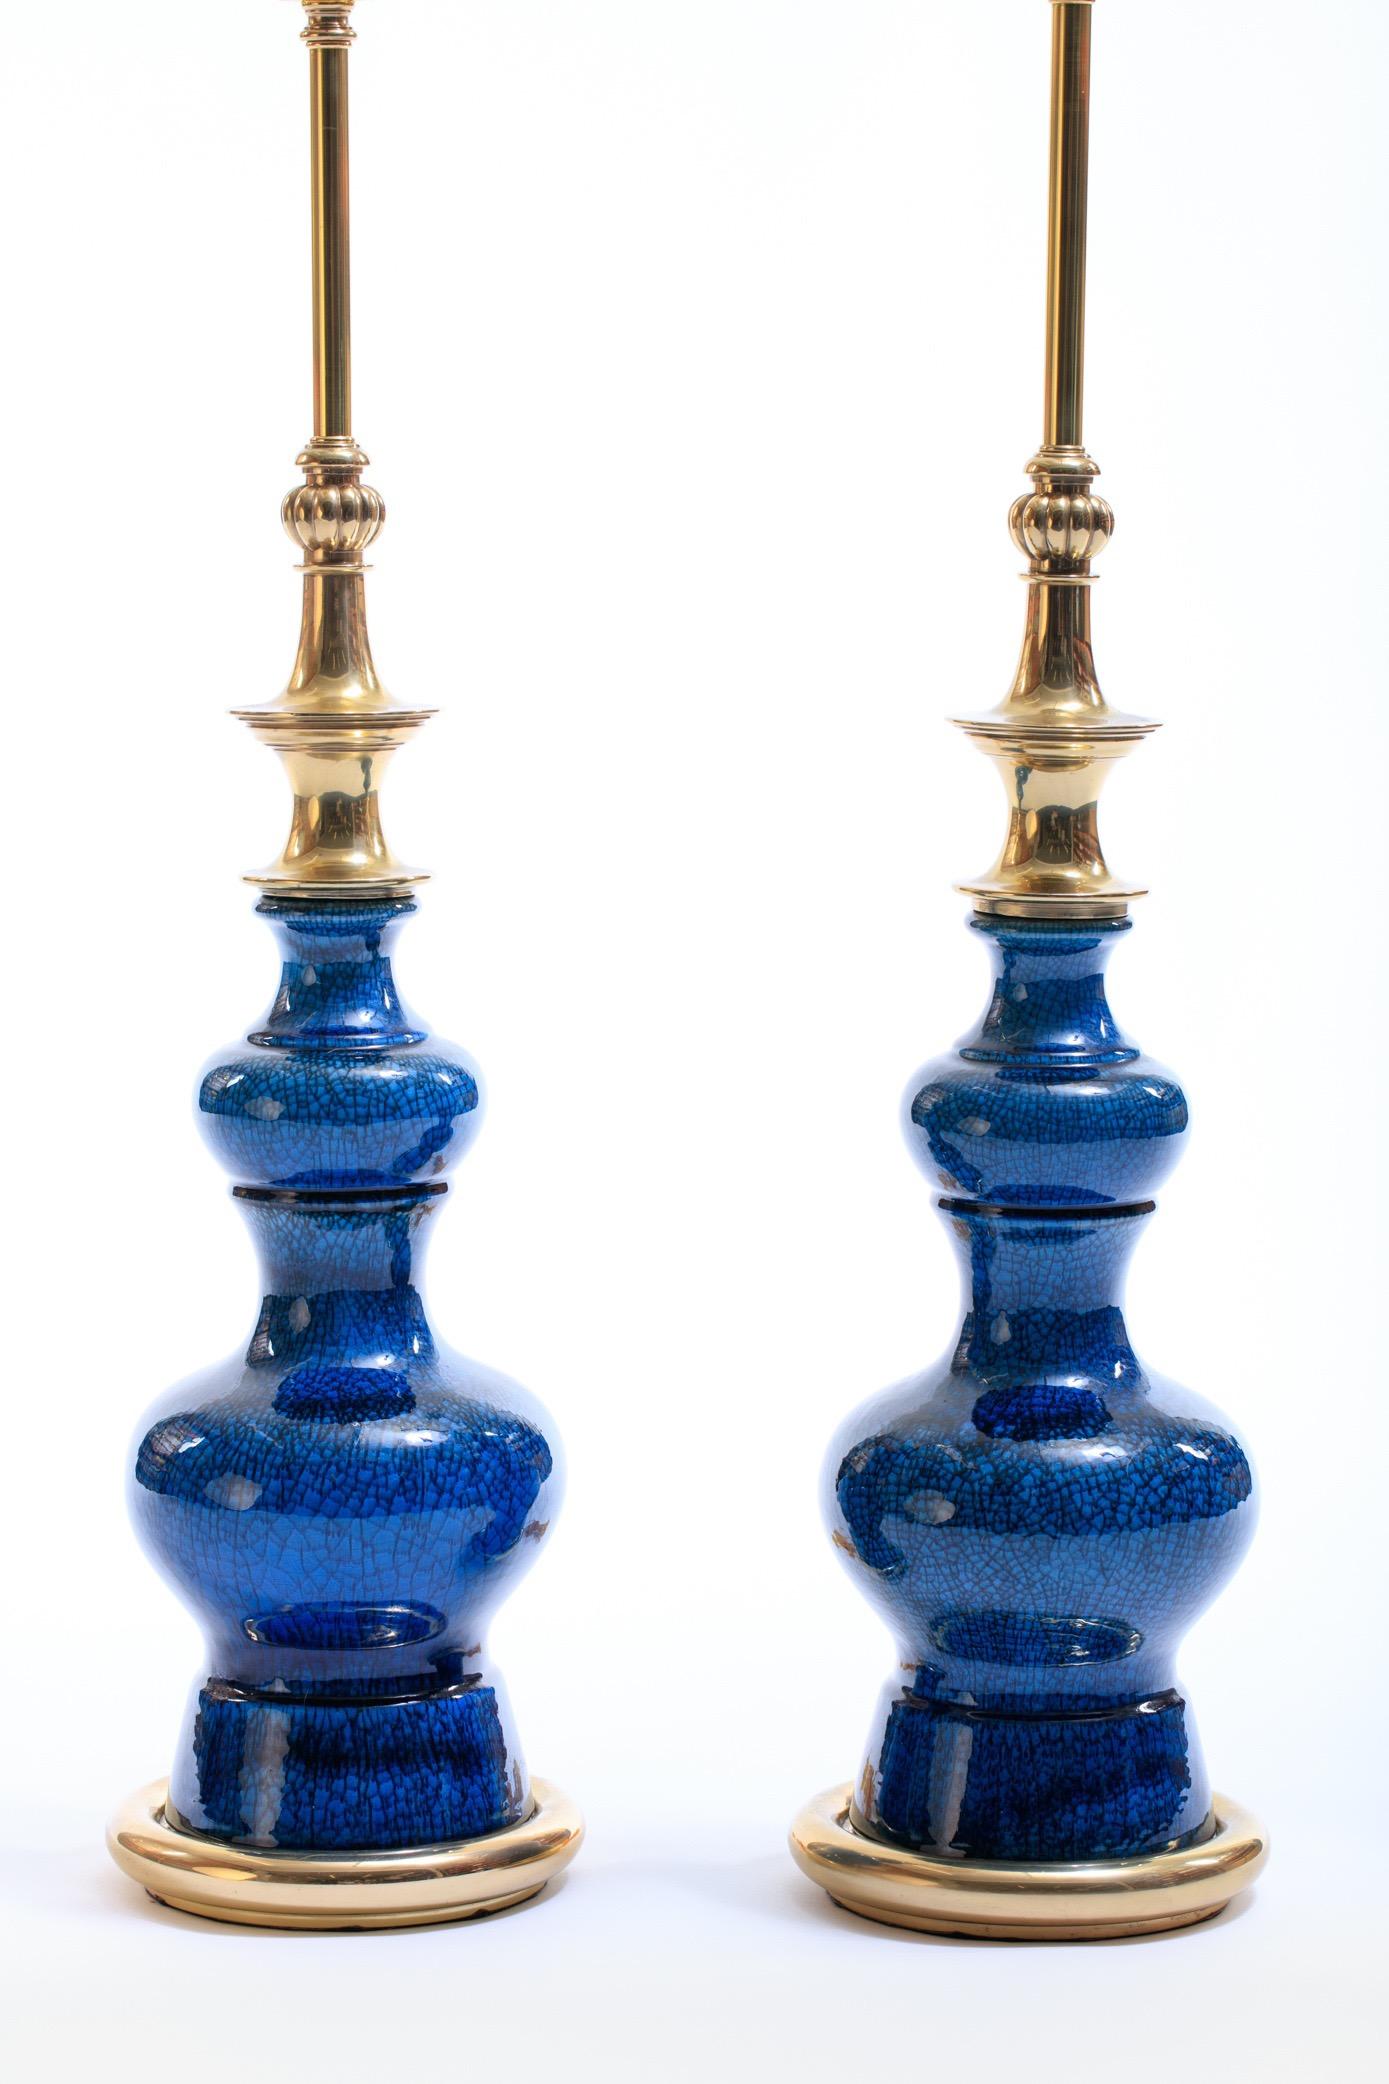 Pair of 1960s lamps with ceramic gourd forms and brass fittings. Deep cobalt blue crackle glaze. Note white reflections of lights in photos are not loses to the finish but instead the reflection of studio lights in the images. The lamps would work